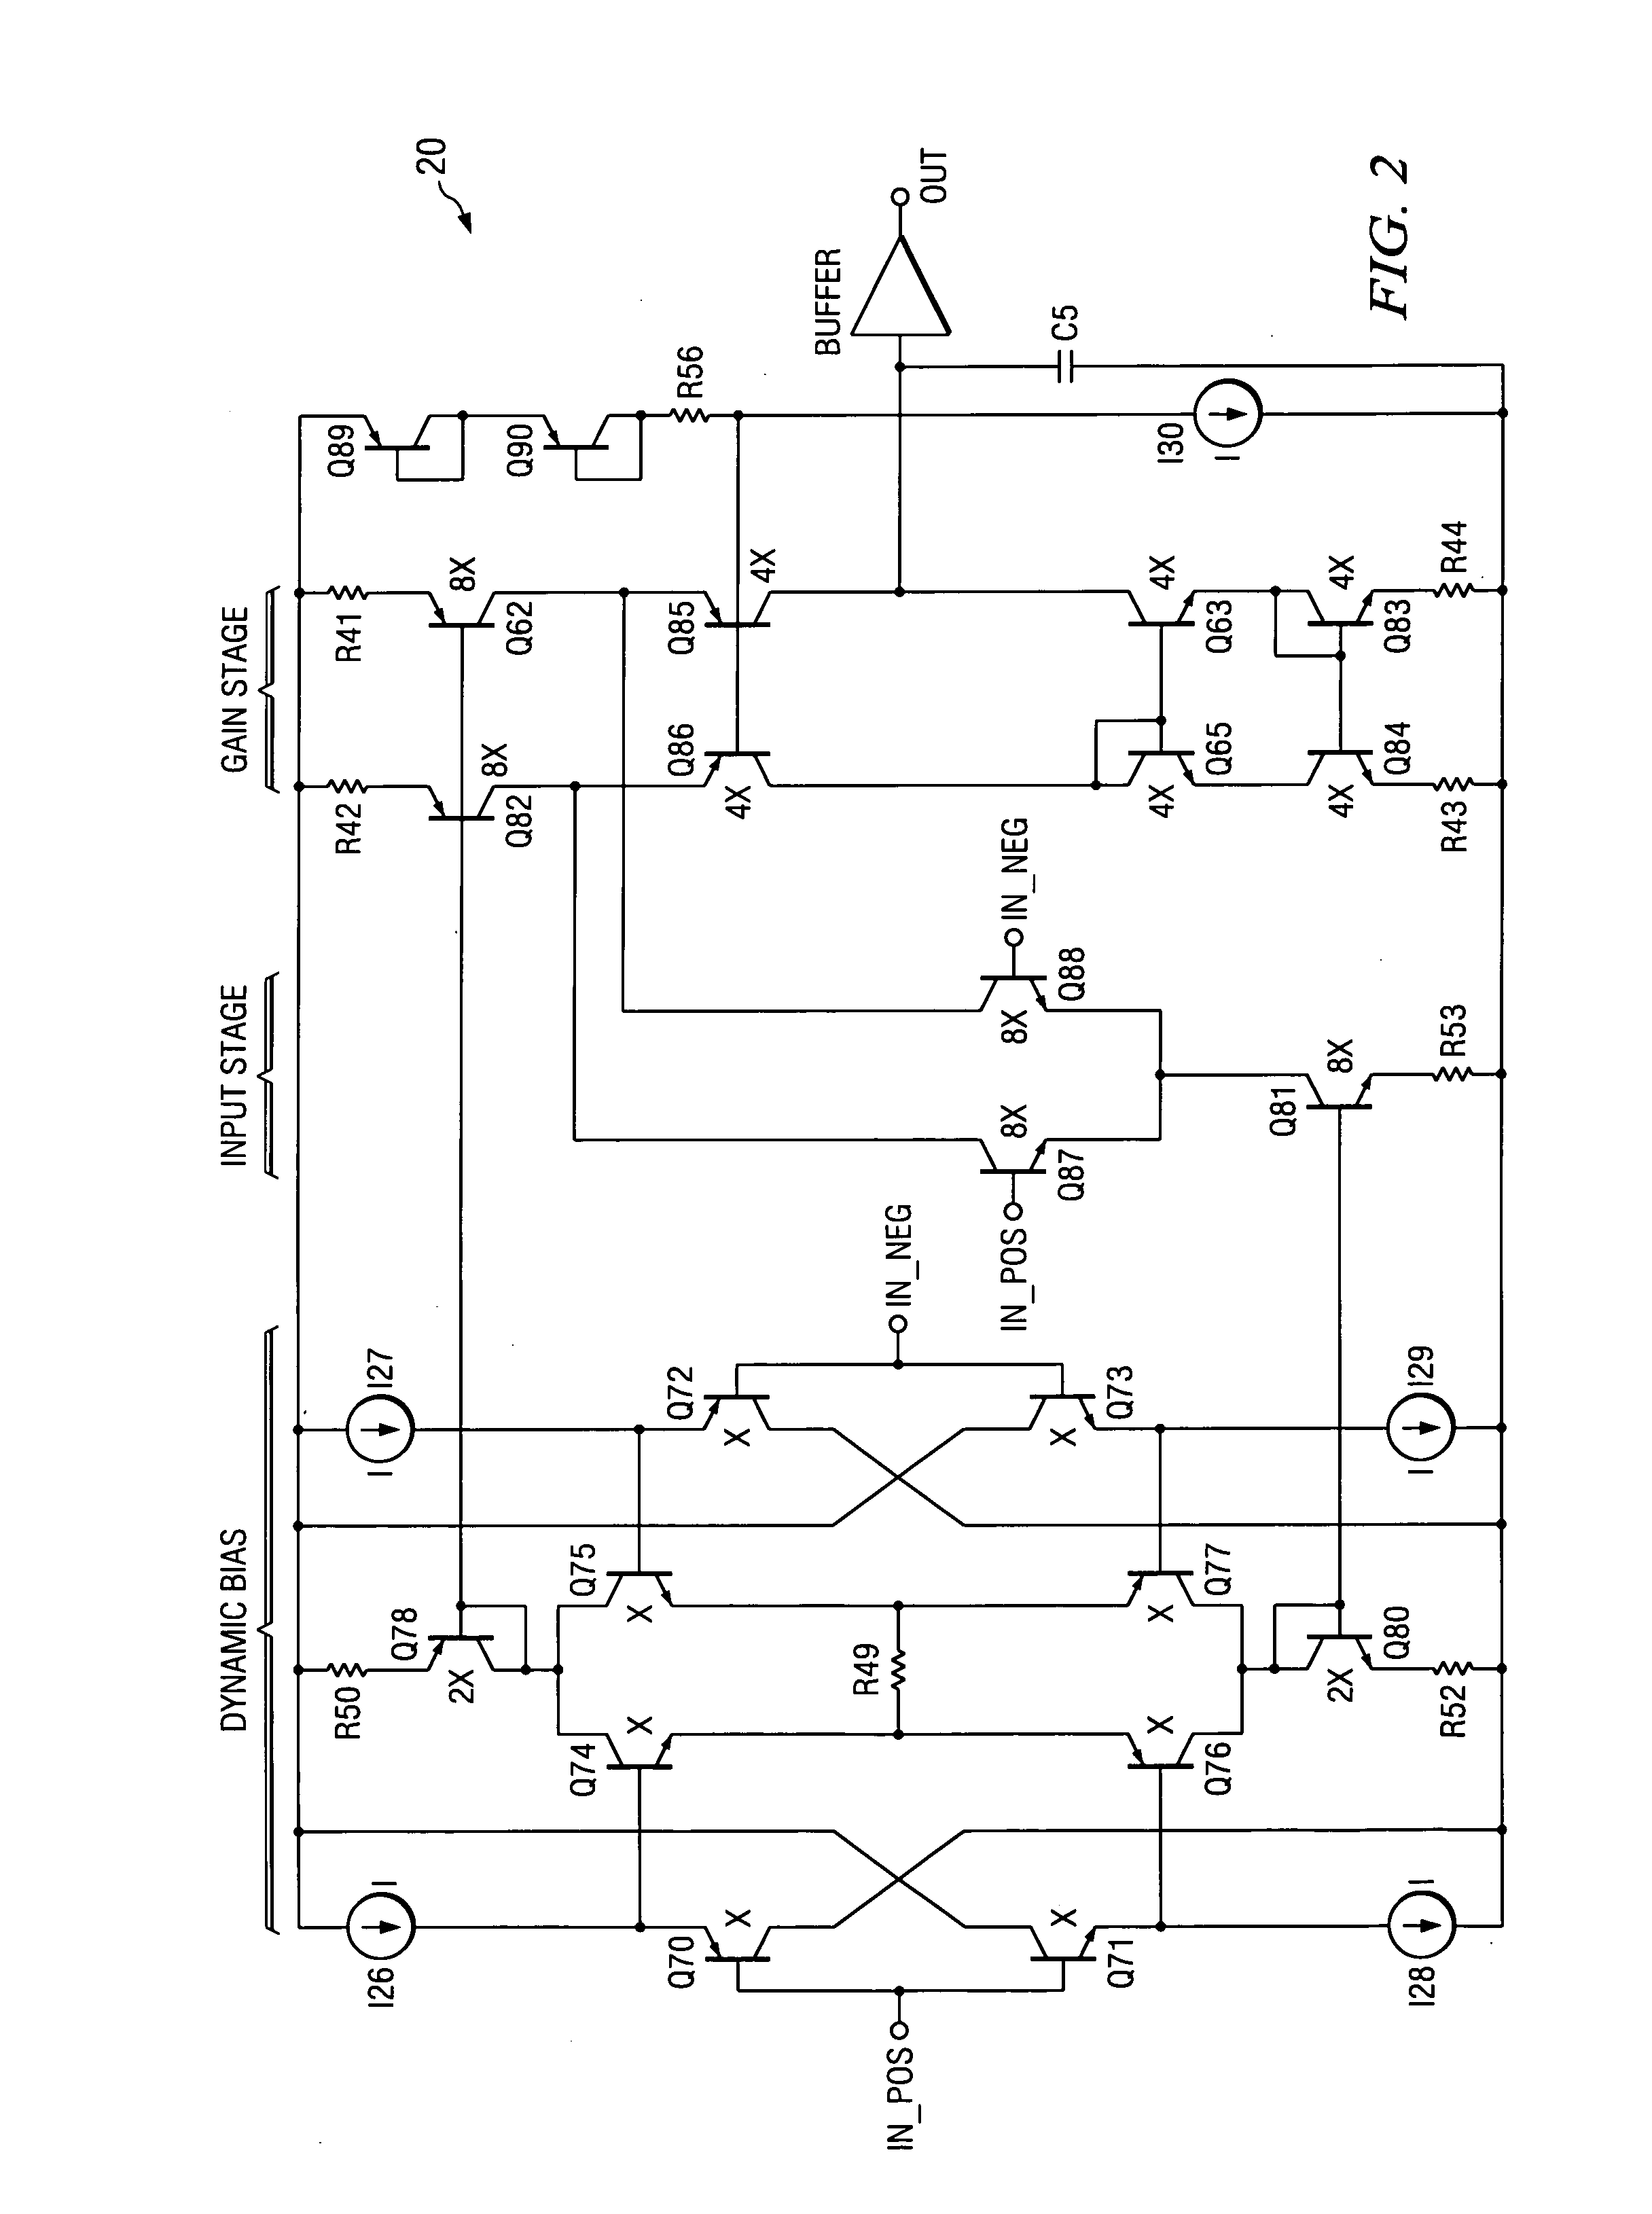 Ultra fast, low noise voltage feedback operational amplifier with dynamic biasing